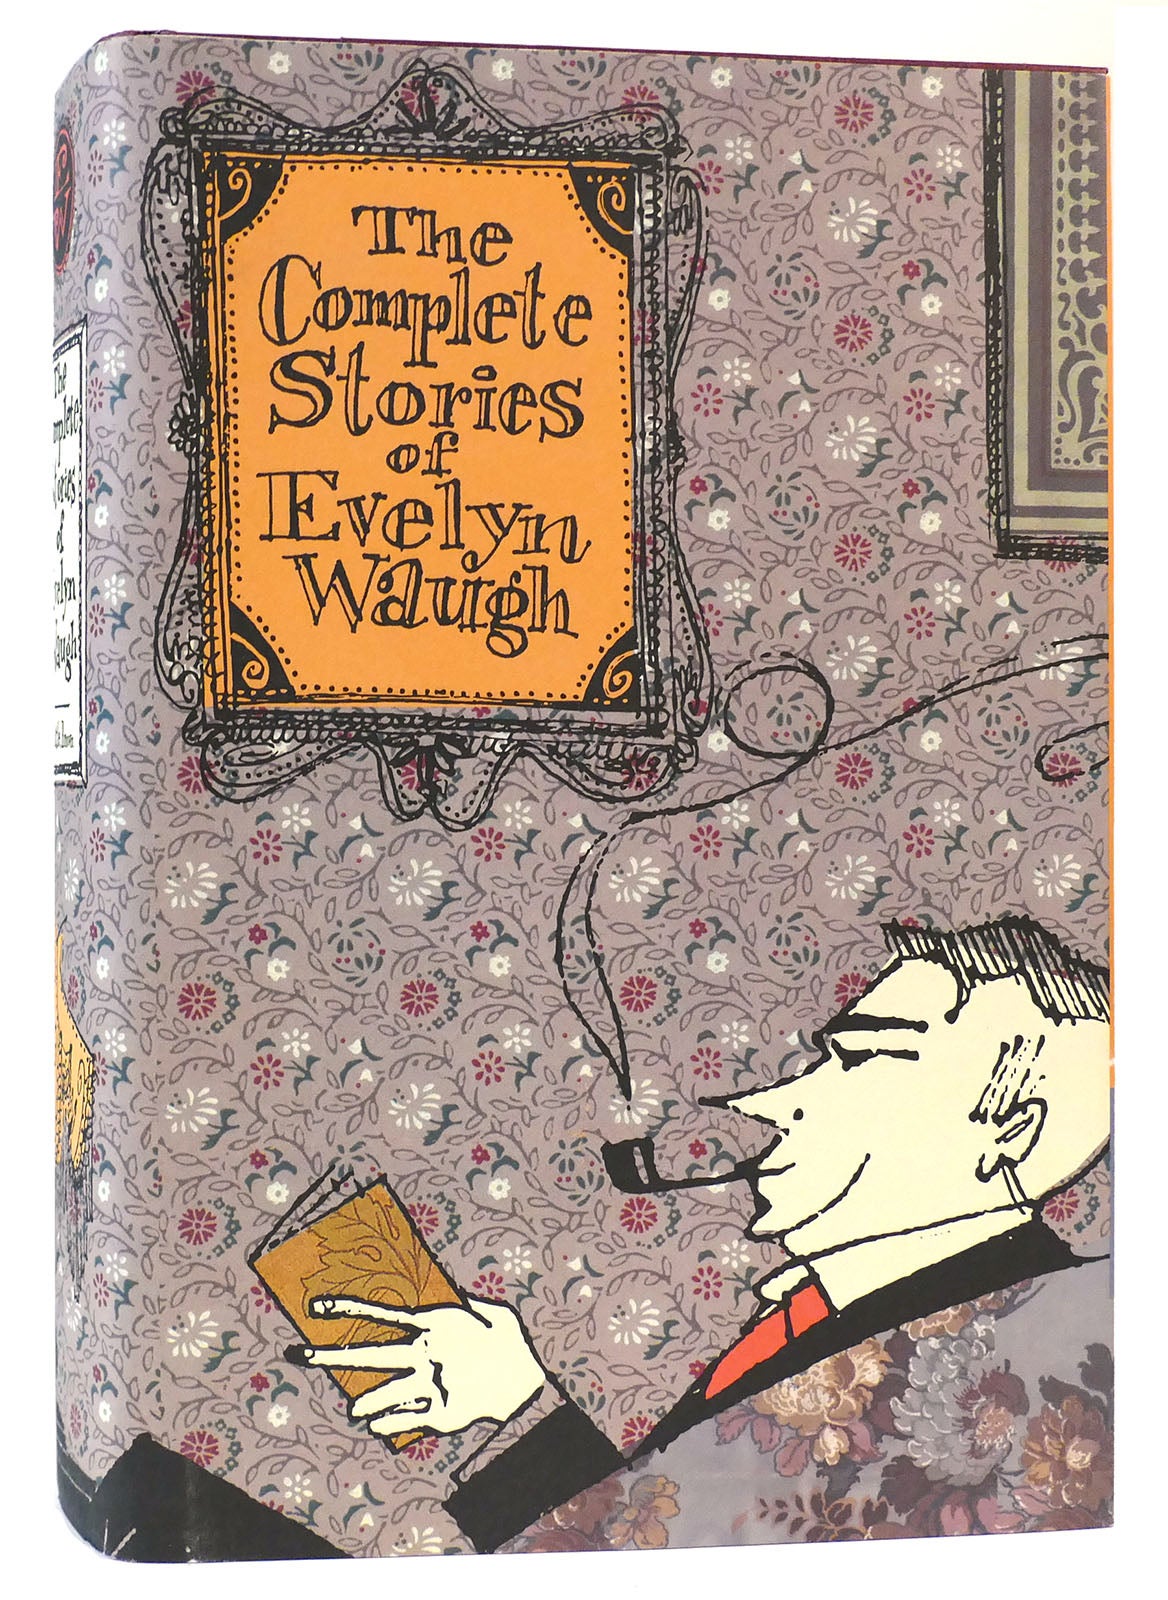 The Complete Stories of Evelyn Waugh [Book]